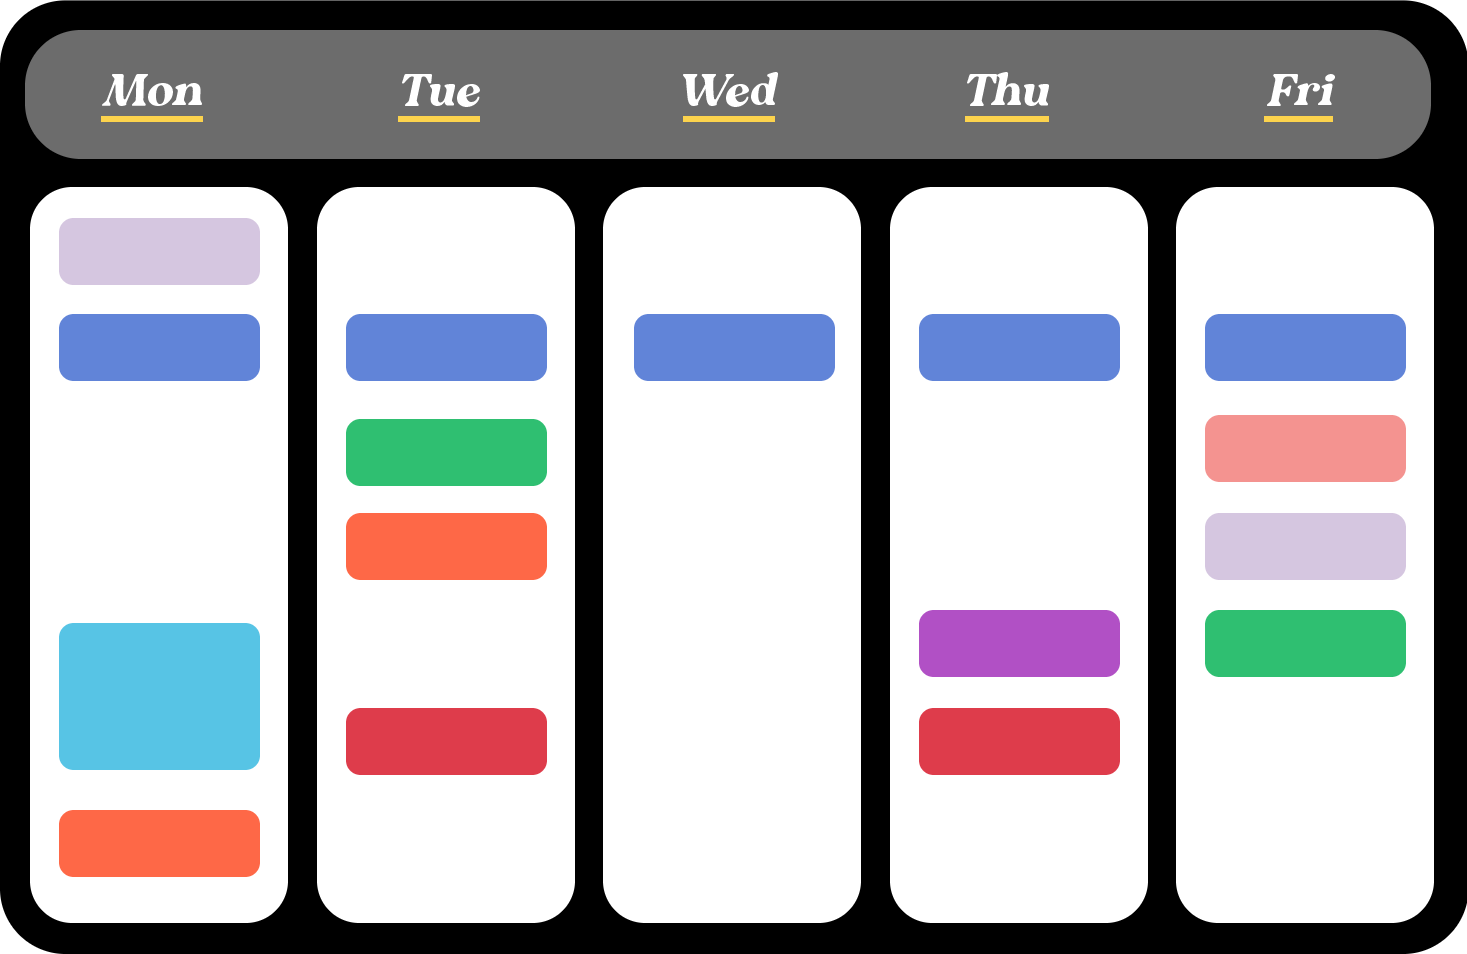 Calendar animation where meetings scheduled on meeting-free Wednesday are rescheduled to Tuesday and Thursday